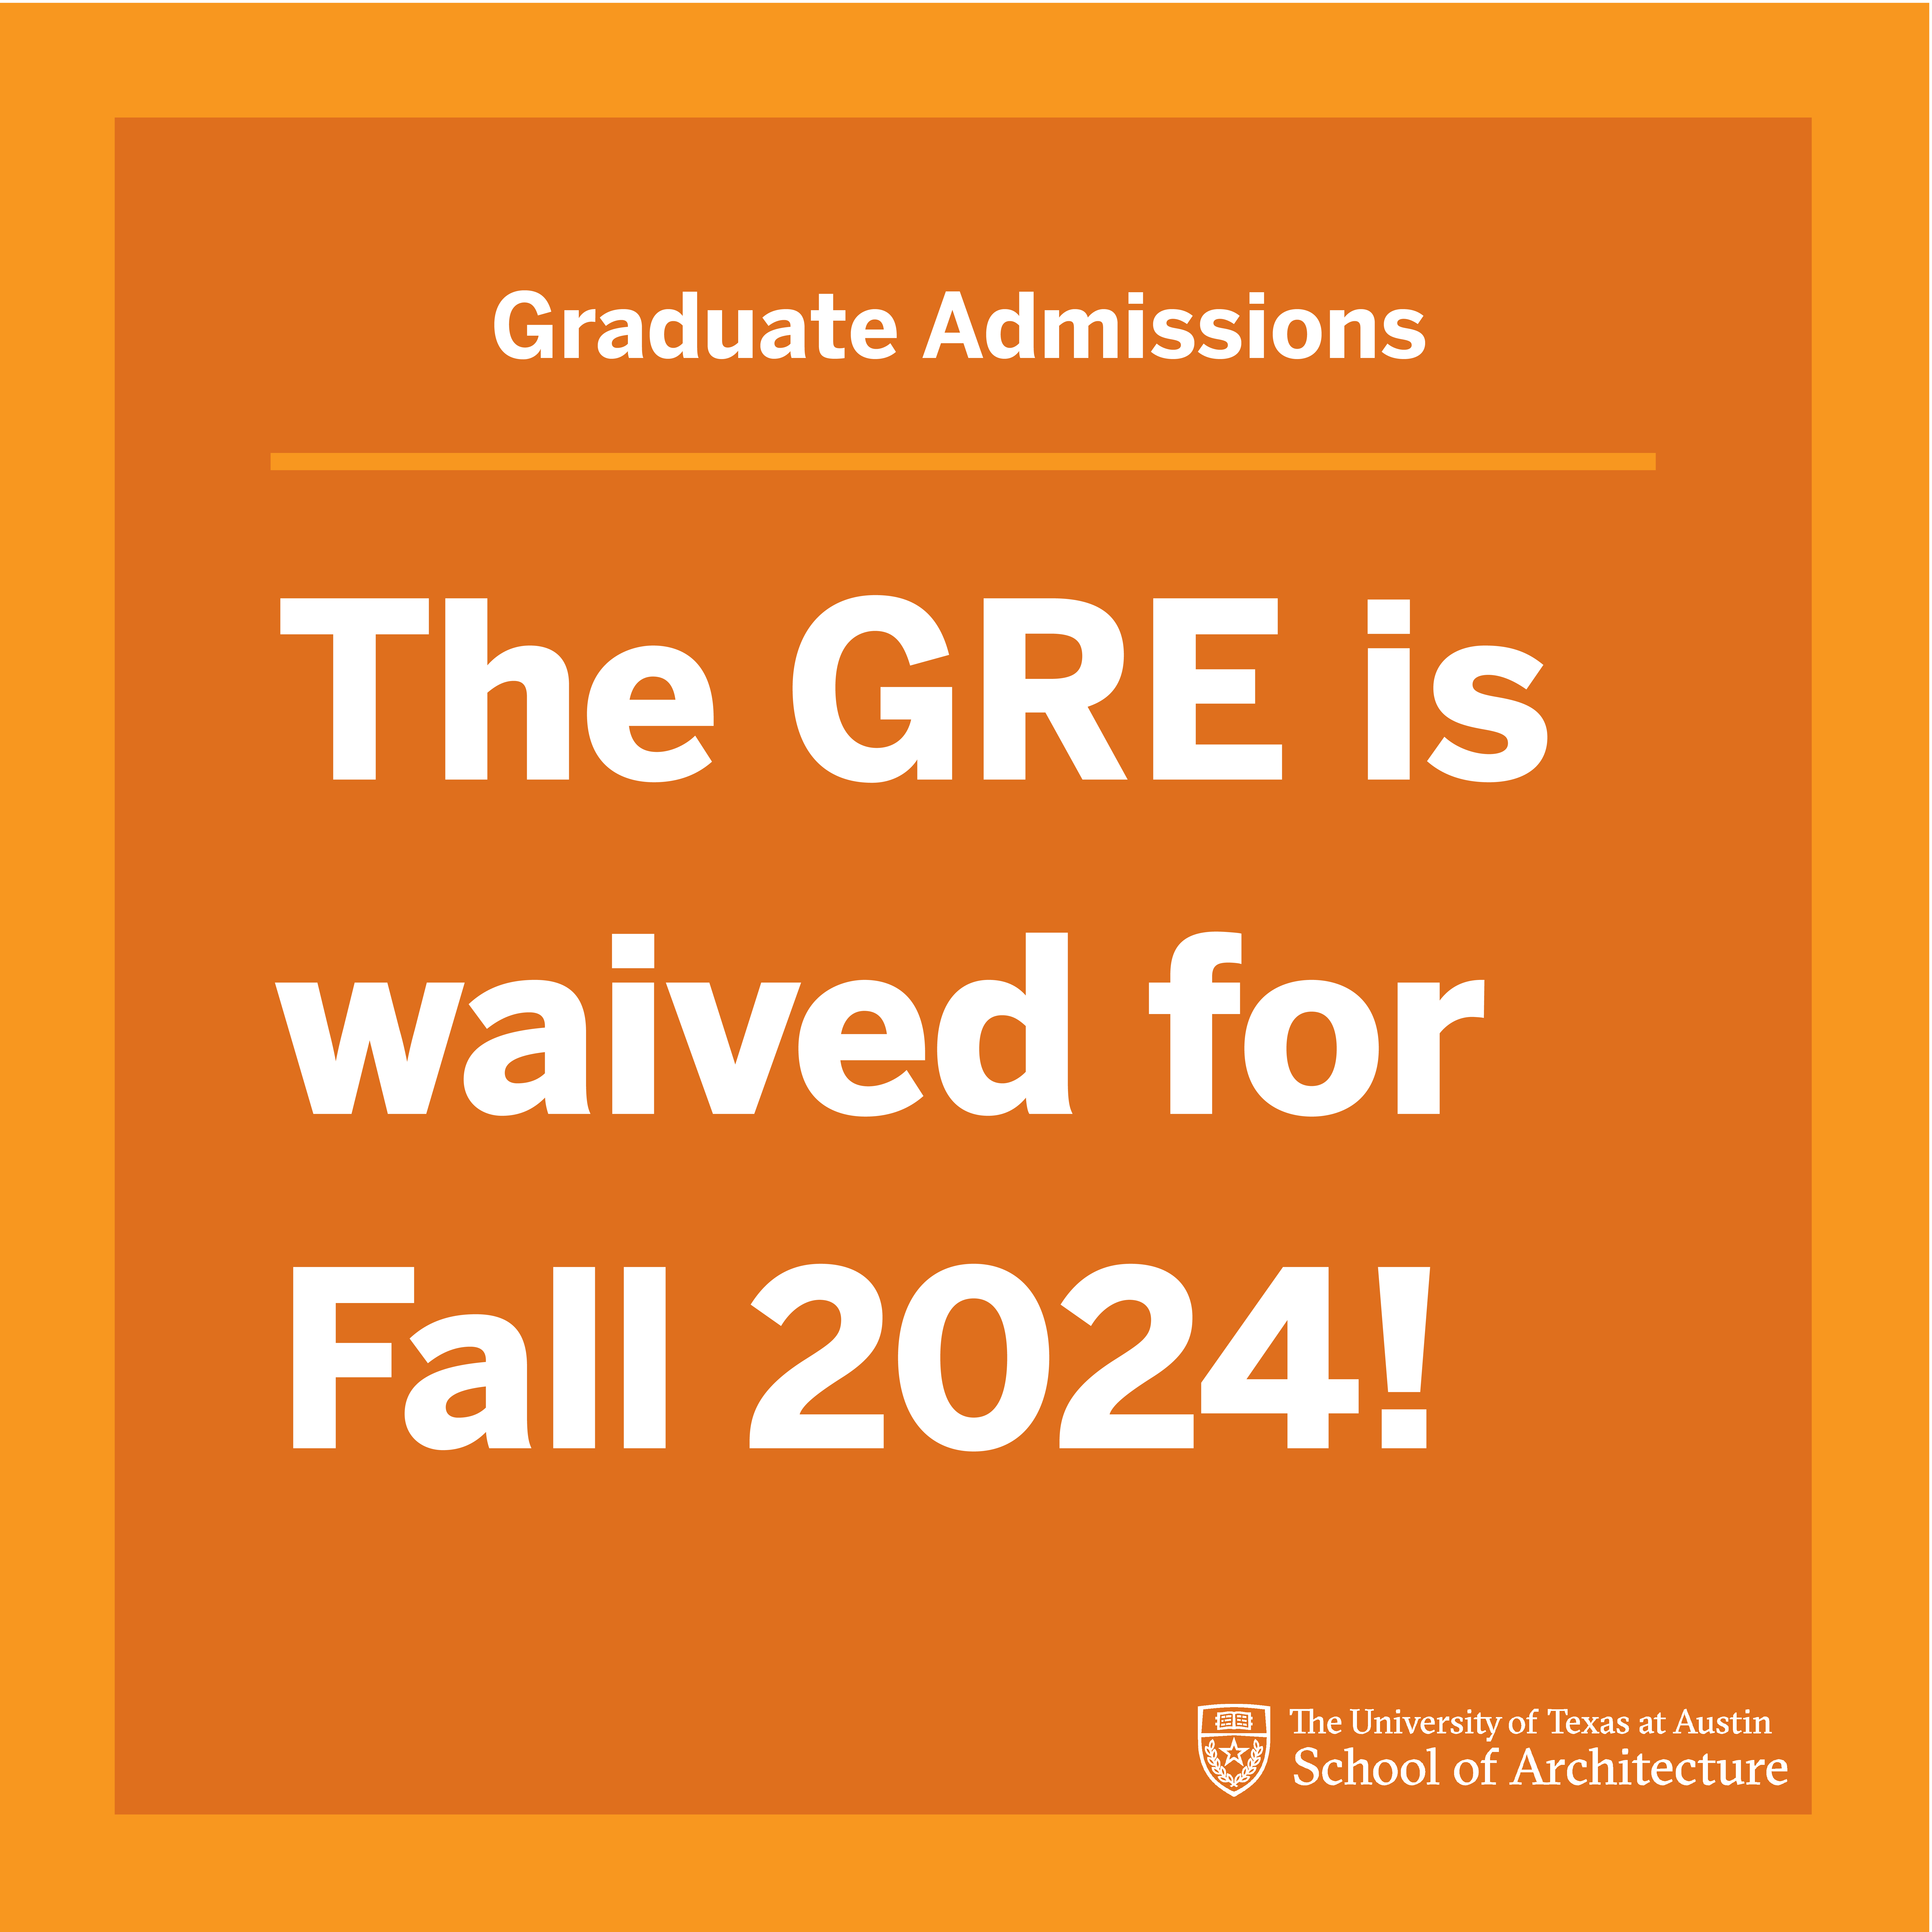 Burnt orange graphic notifying applicants that the GRE is waived for Fall 2024